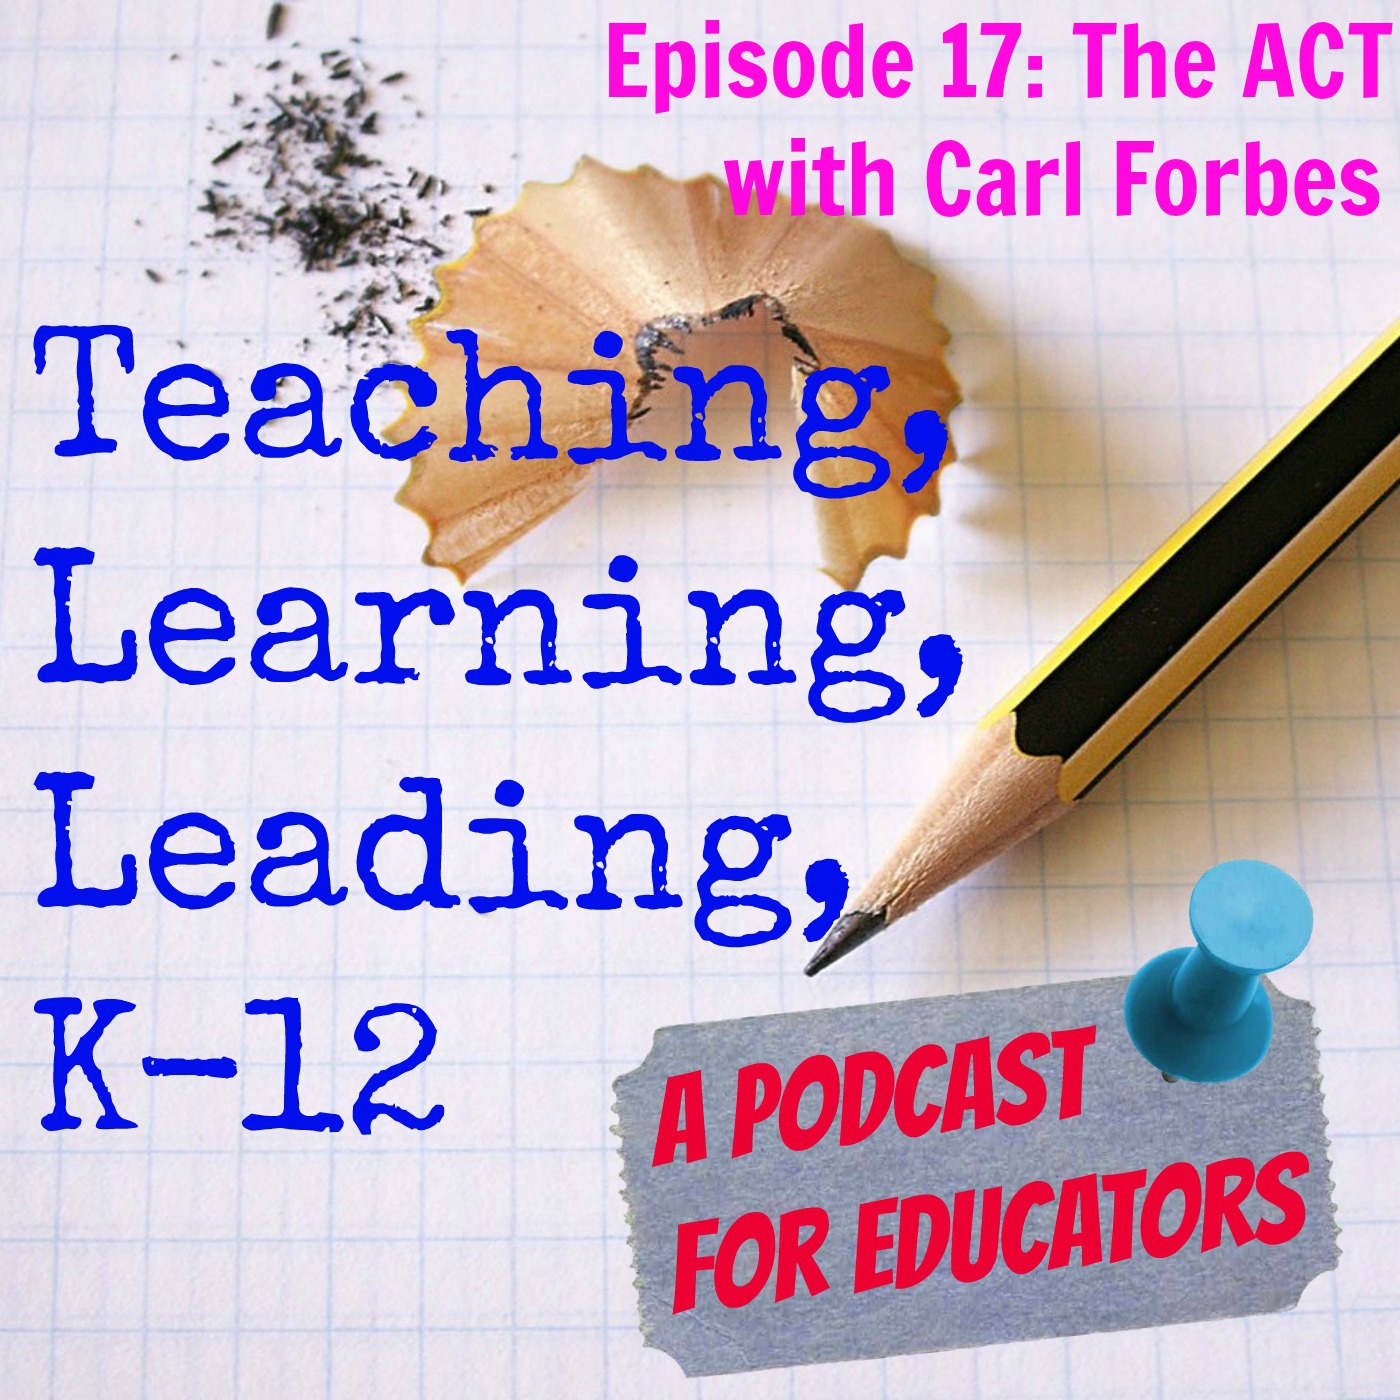 Episode 17: The ACT with Carl Forbes